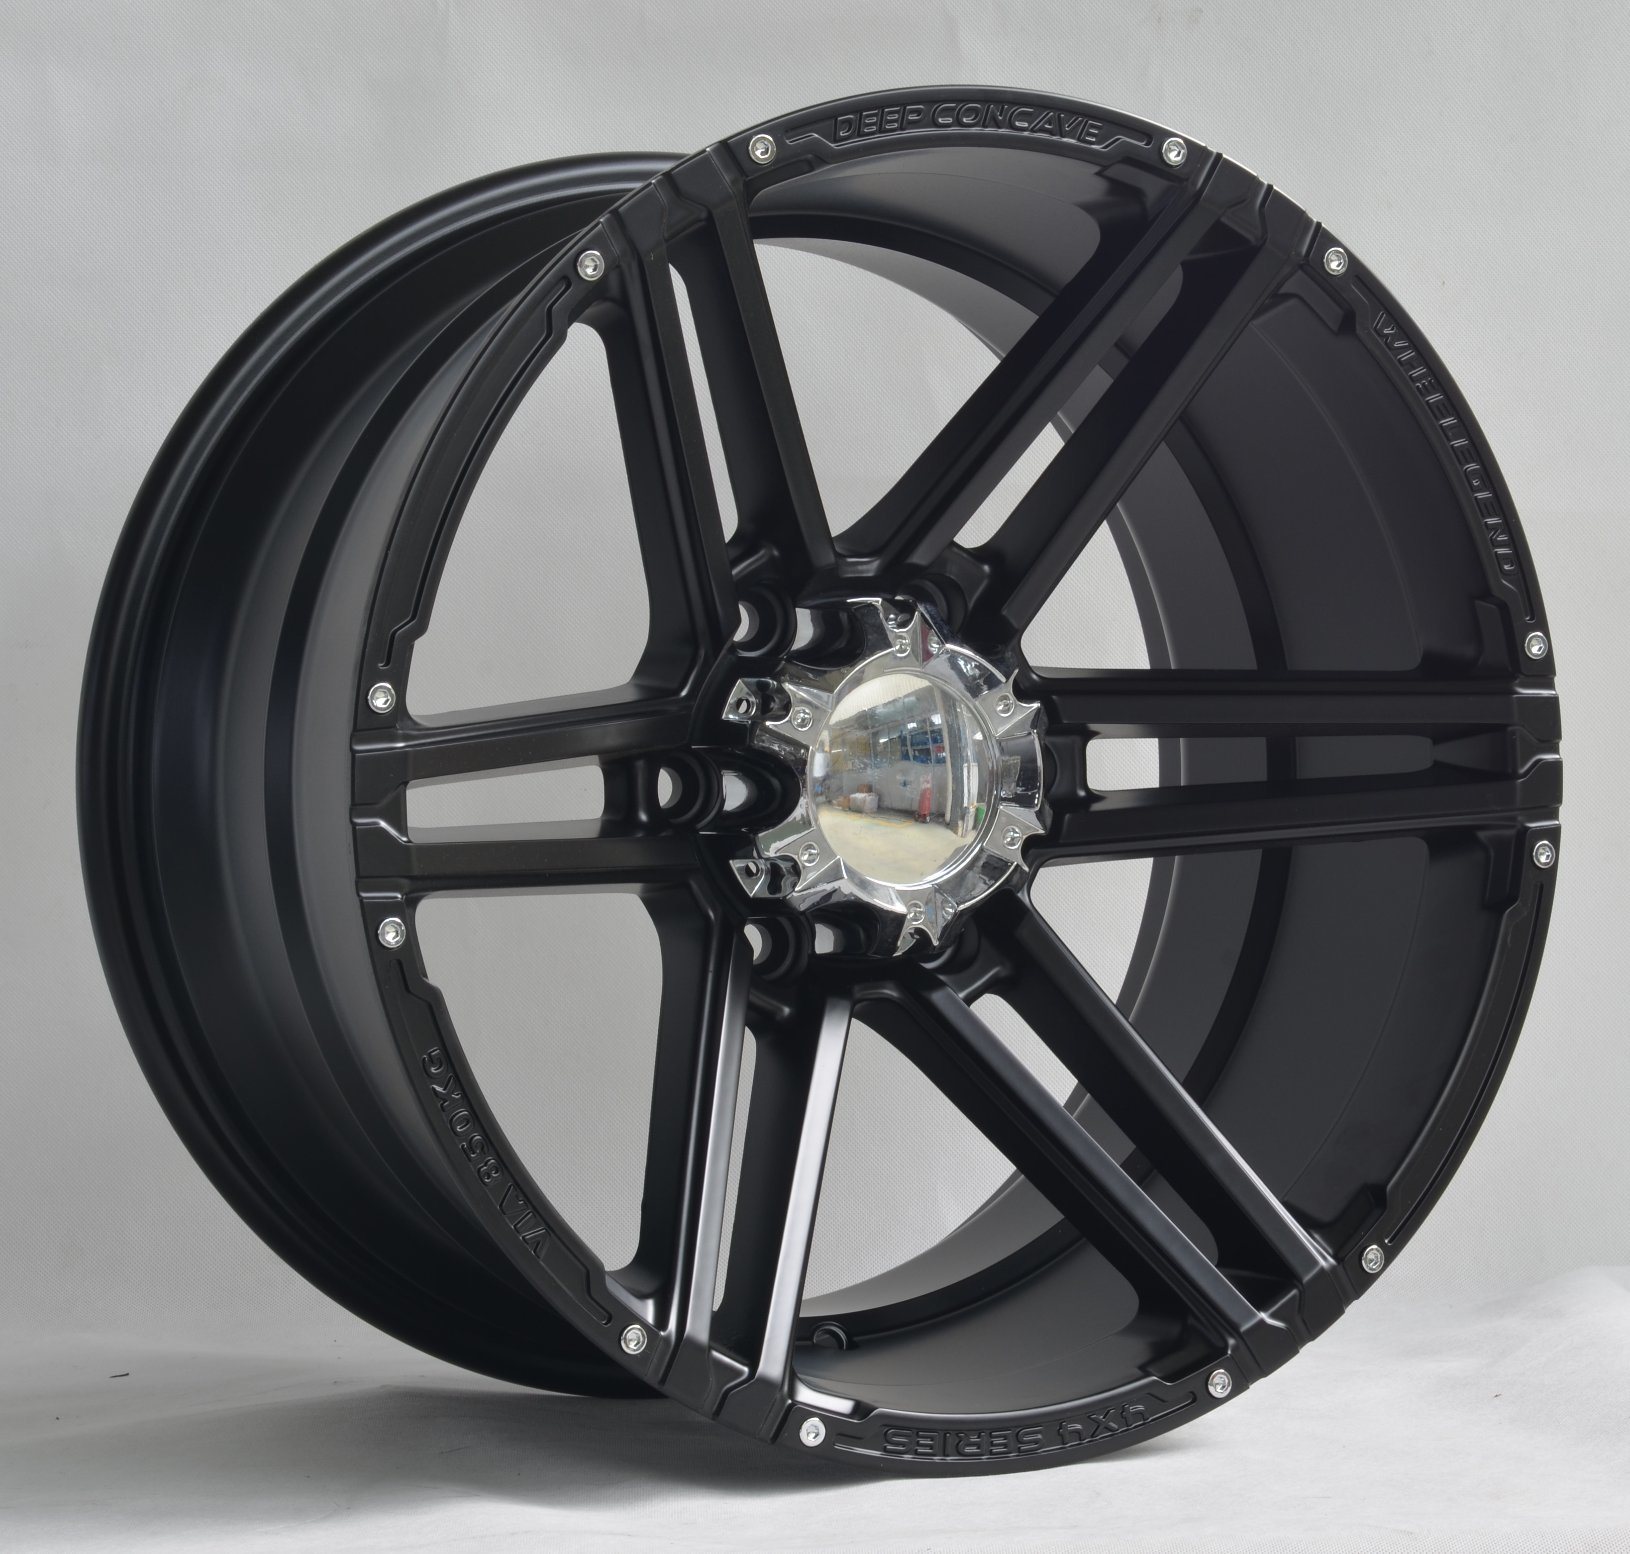 22inch Alloy Wheel with Promotion Price